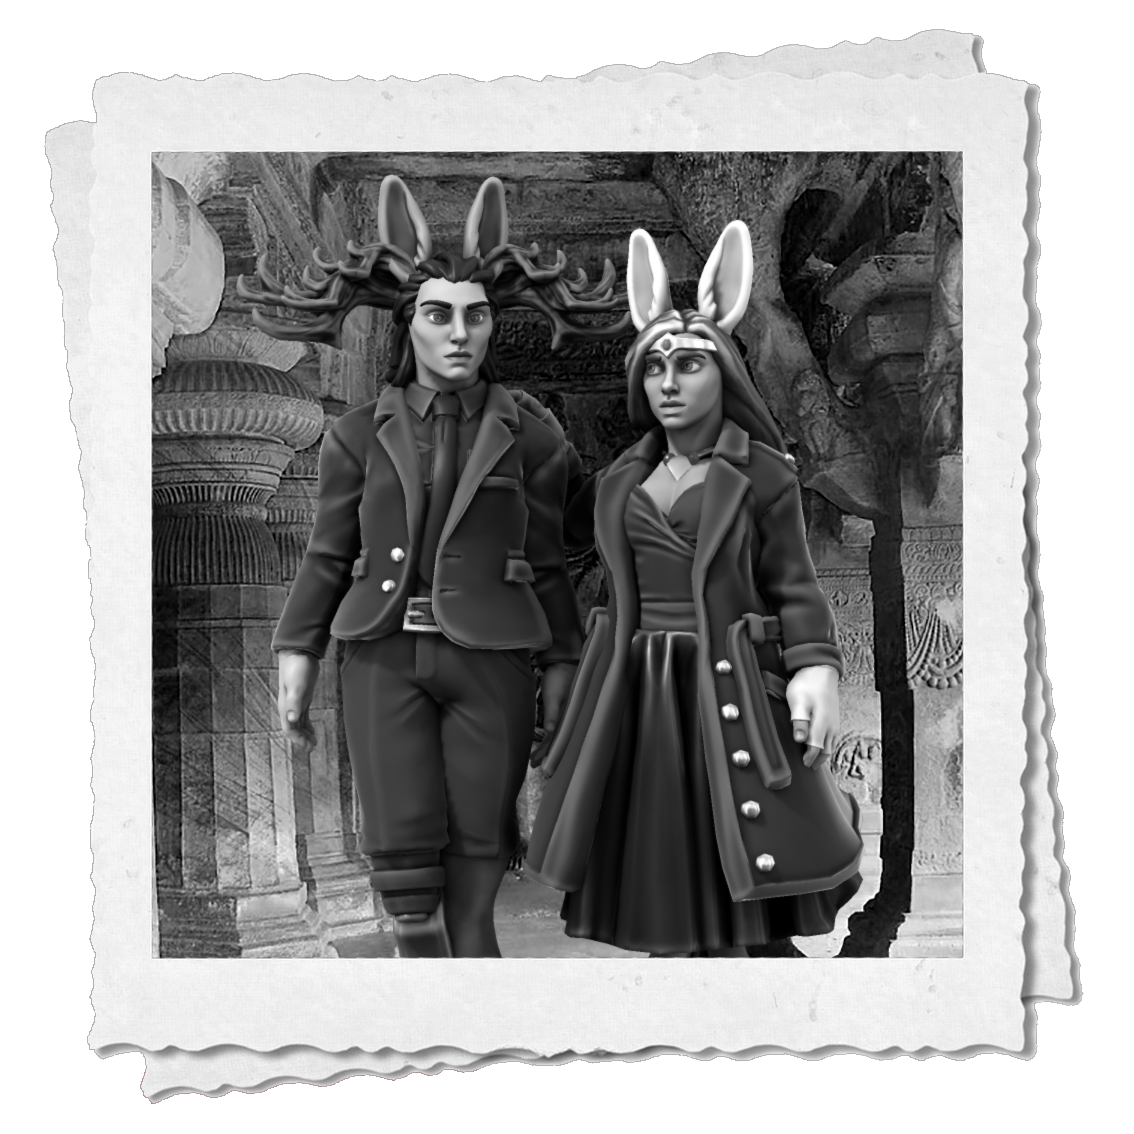 A younger man and an older woman, both with bunny ears, in an underground hallway